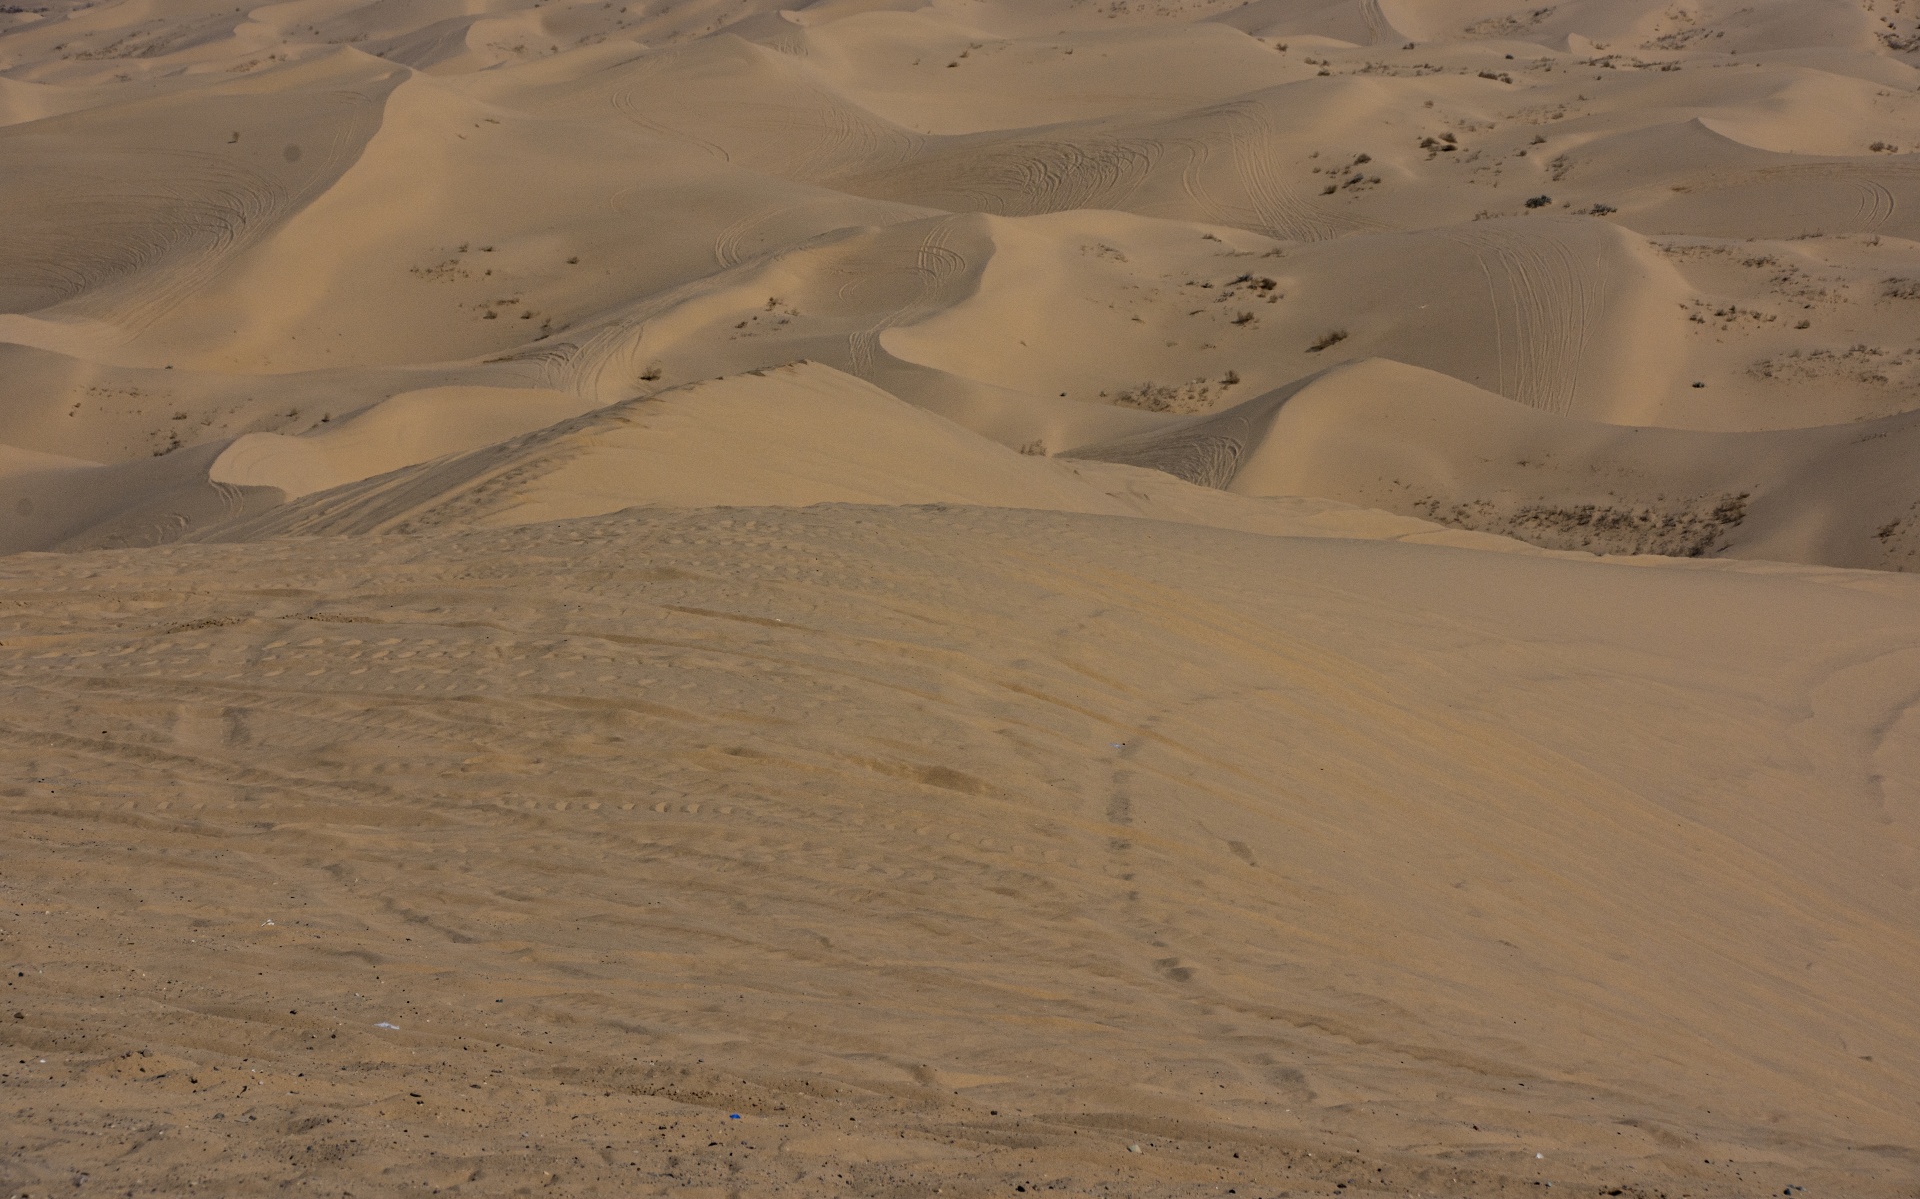 the dune buggy territory of imperial sand dunes, california